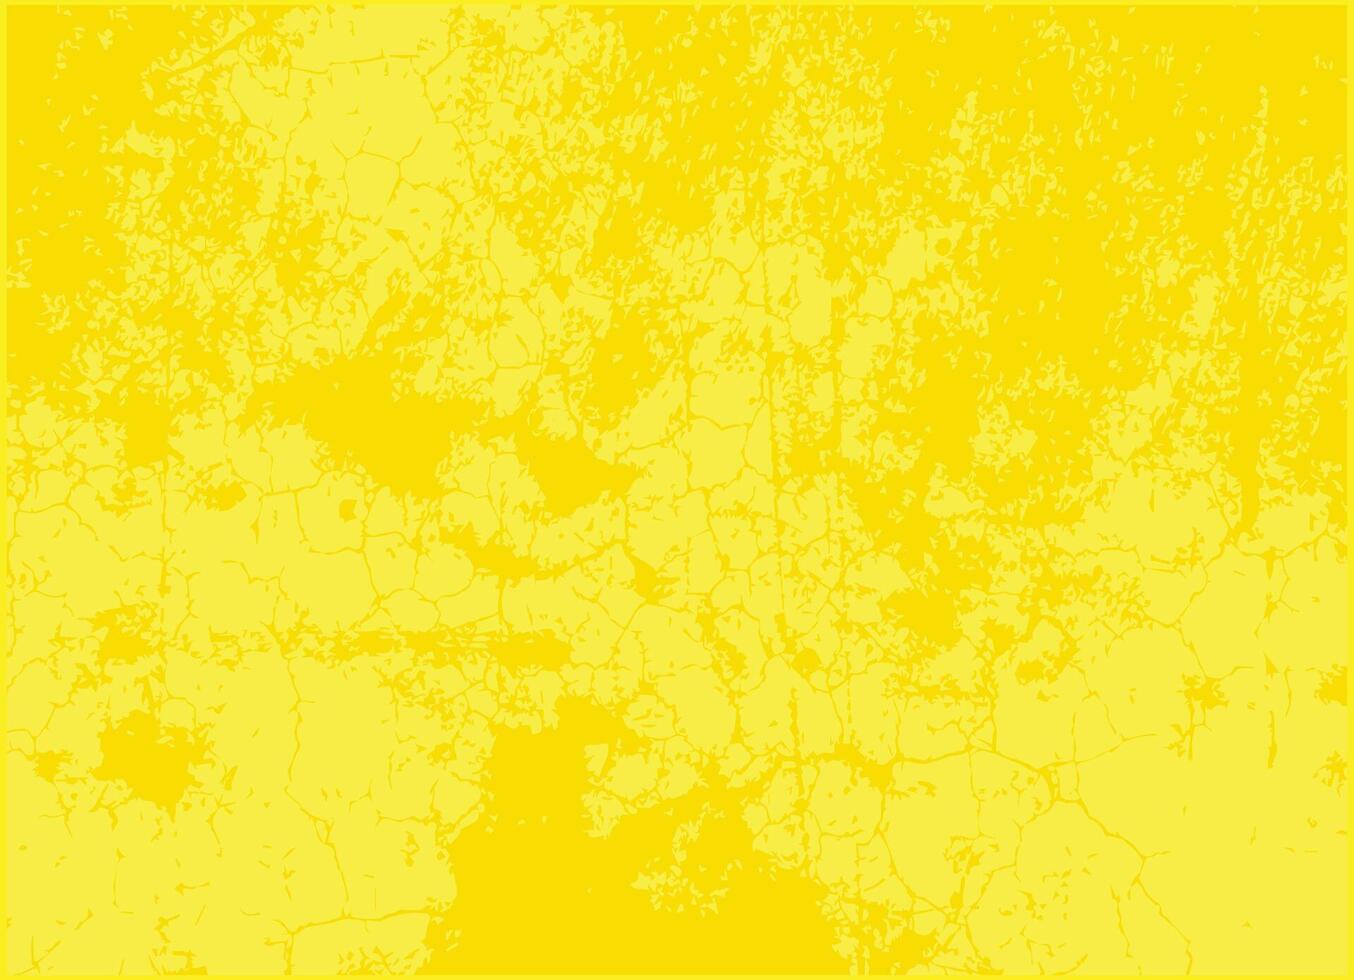 Dirty Yellow Wall Background vector